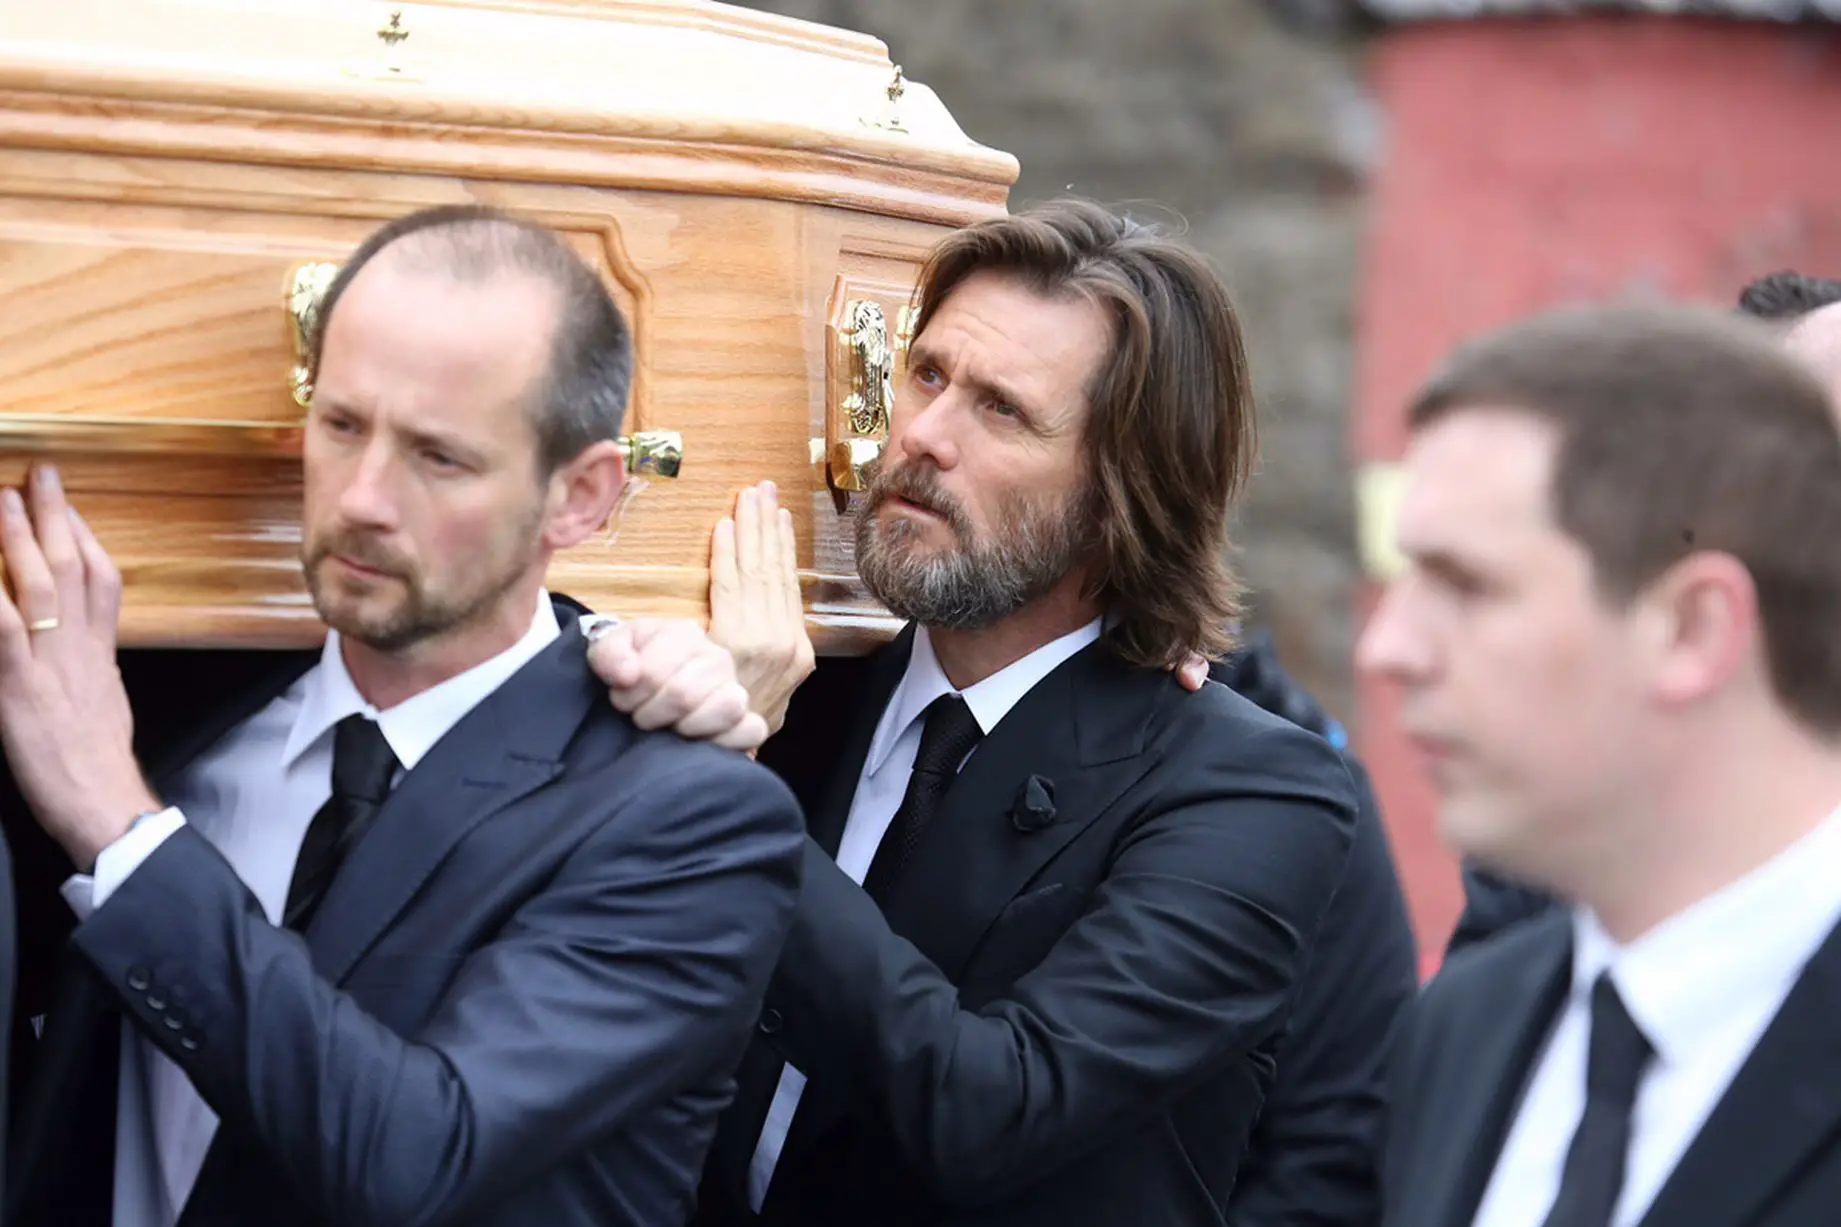 Jim-Carrey-Carries-The-Coffin-Of-Ex-Girlfriend-Catriona-White-at-her-funeral-in-Ireland